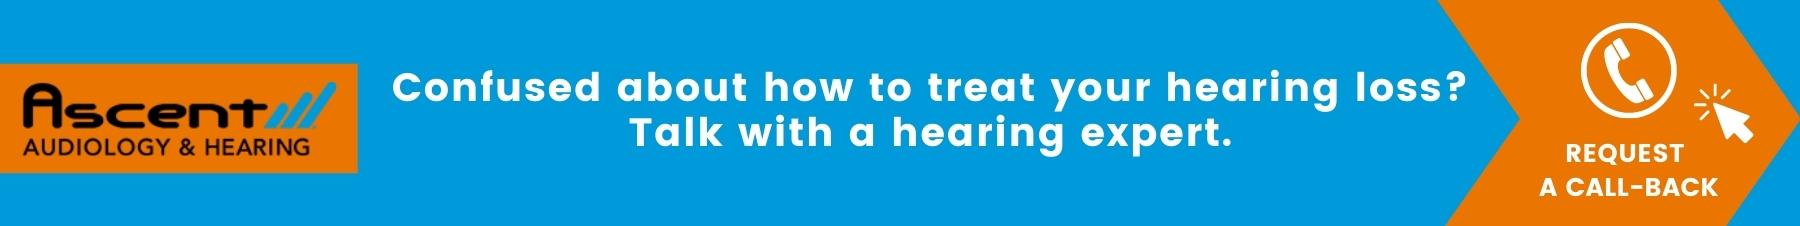 Confused about how to treat your hearing? Talk with a hearing expert